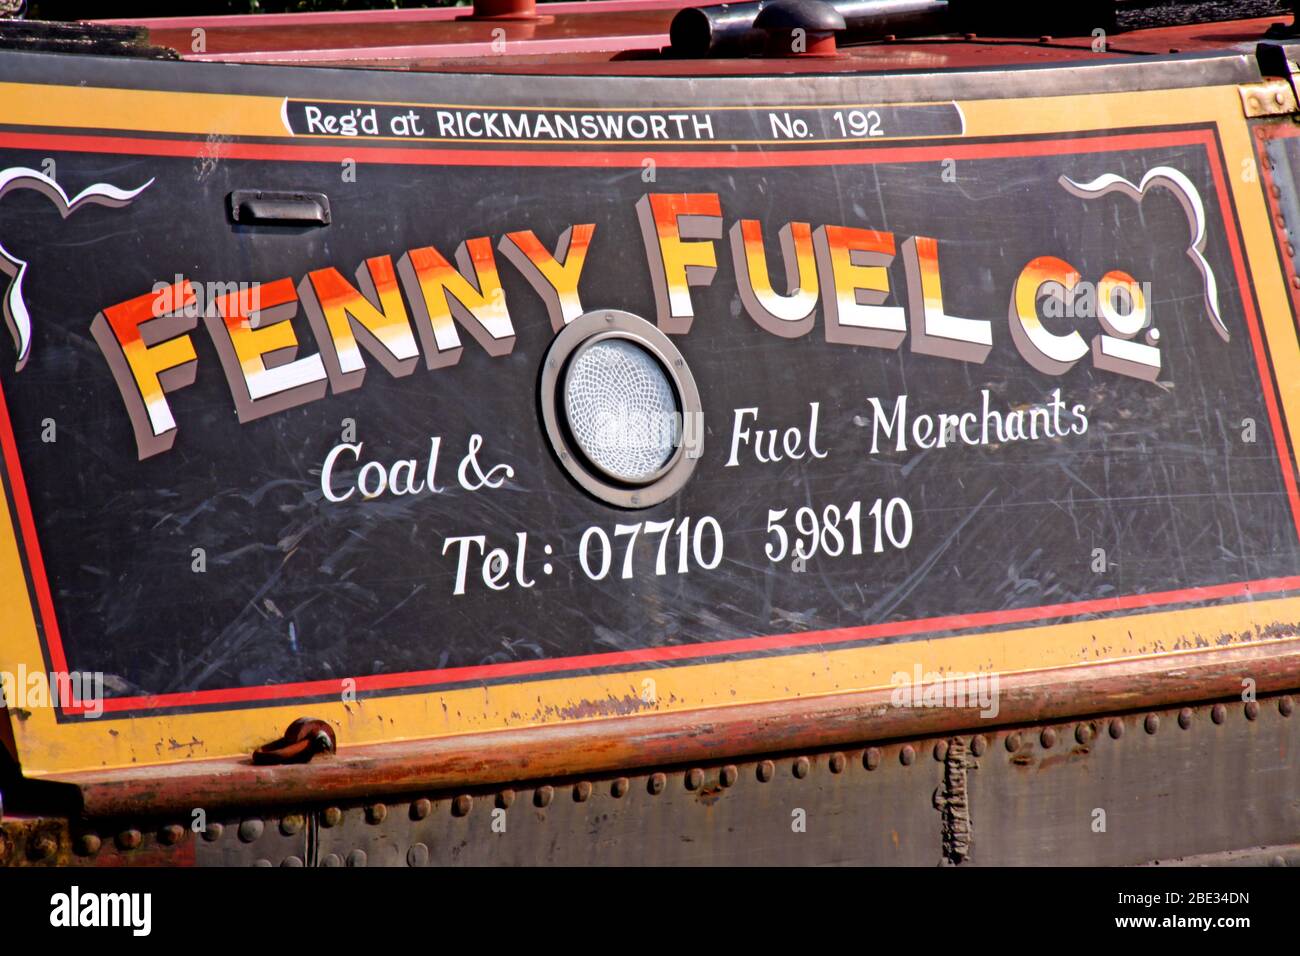 British Canal & River Trust, funktionierende Kanalbargenboote, Northwich, Cheshire Ring - Fenny Fuel Co - Rickmansworth no 192 Stockfoto